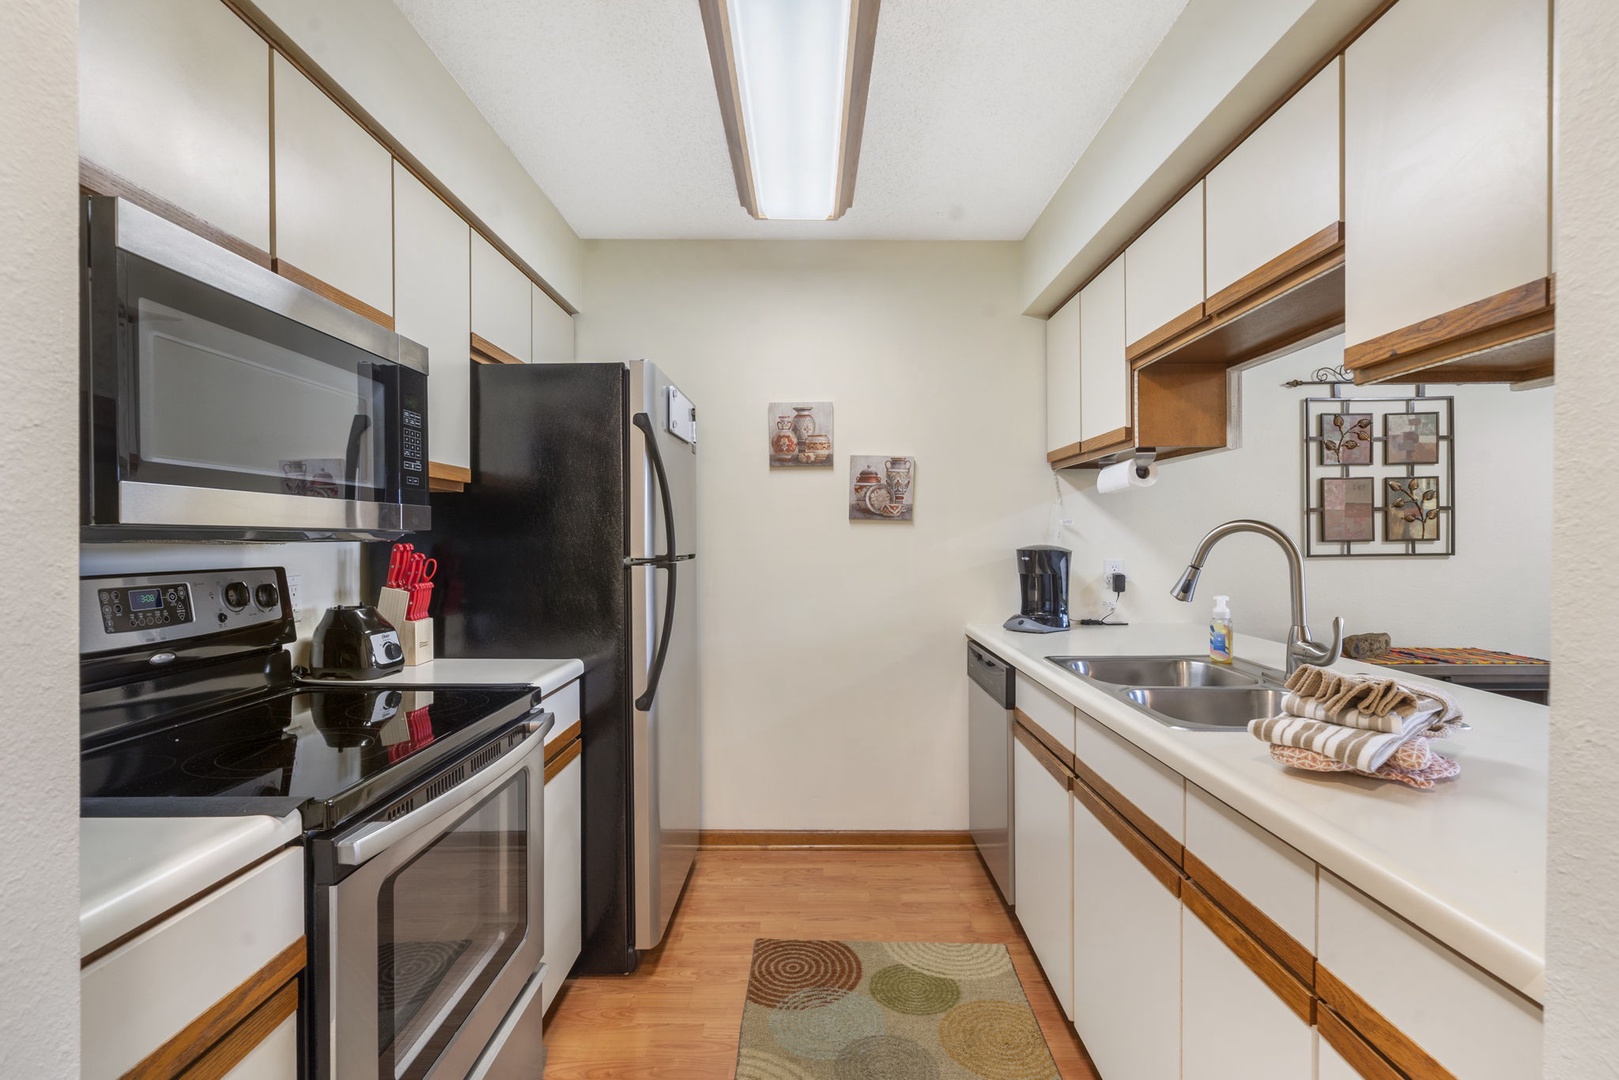 Head into the open kitchen, offering ample storage space & lots of amenities